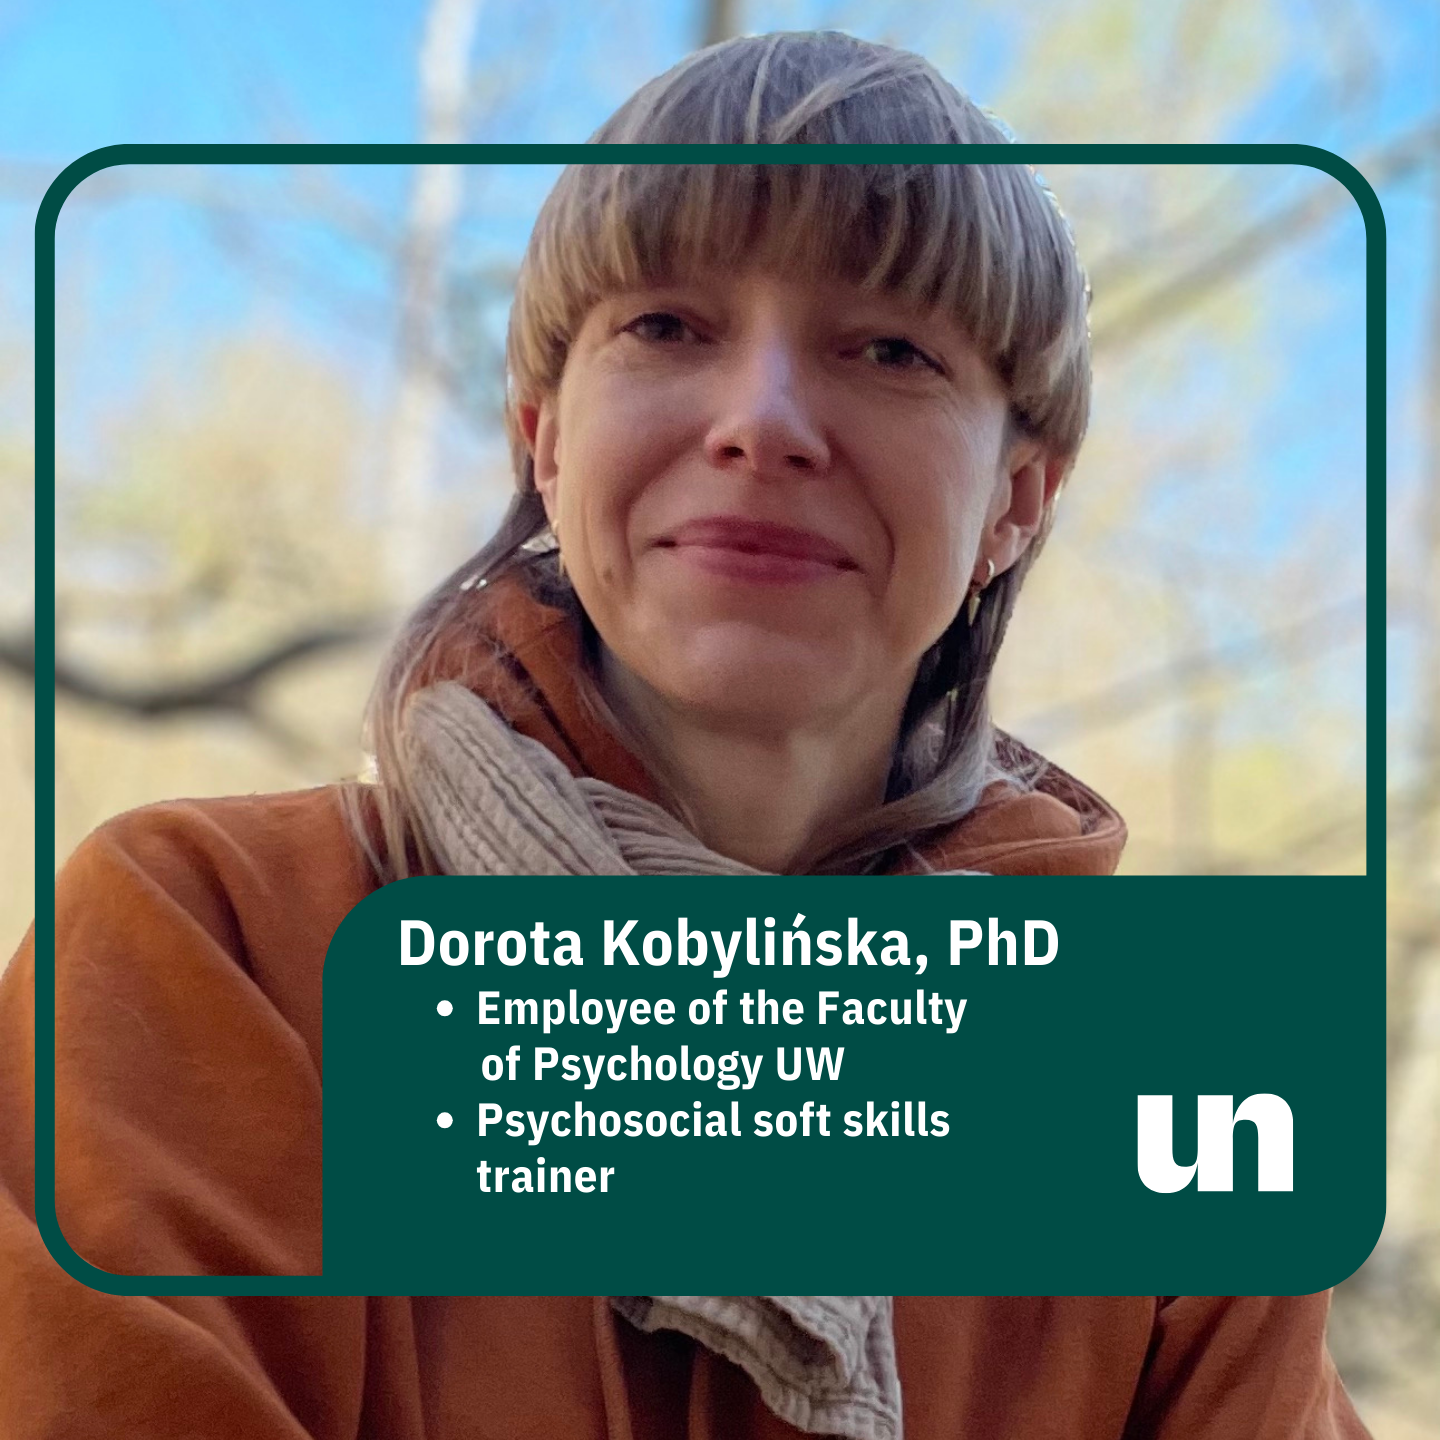 Click and find out more about Dorota Kobylińska